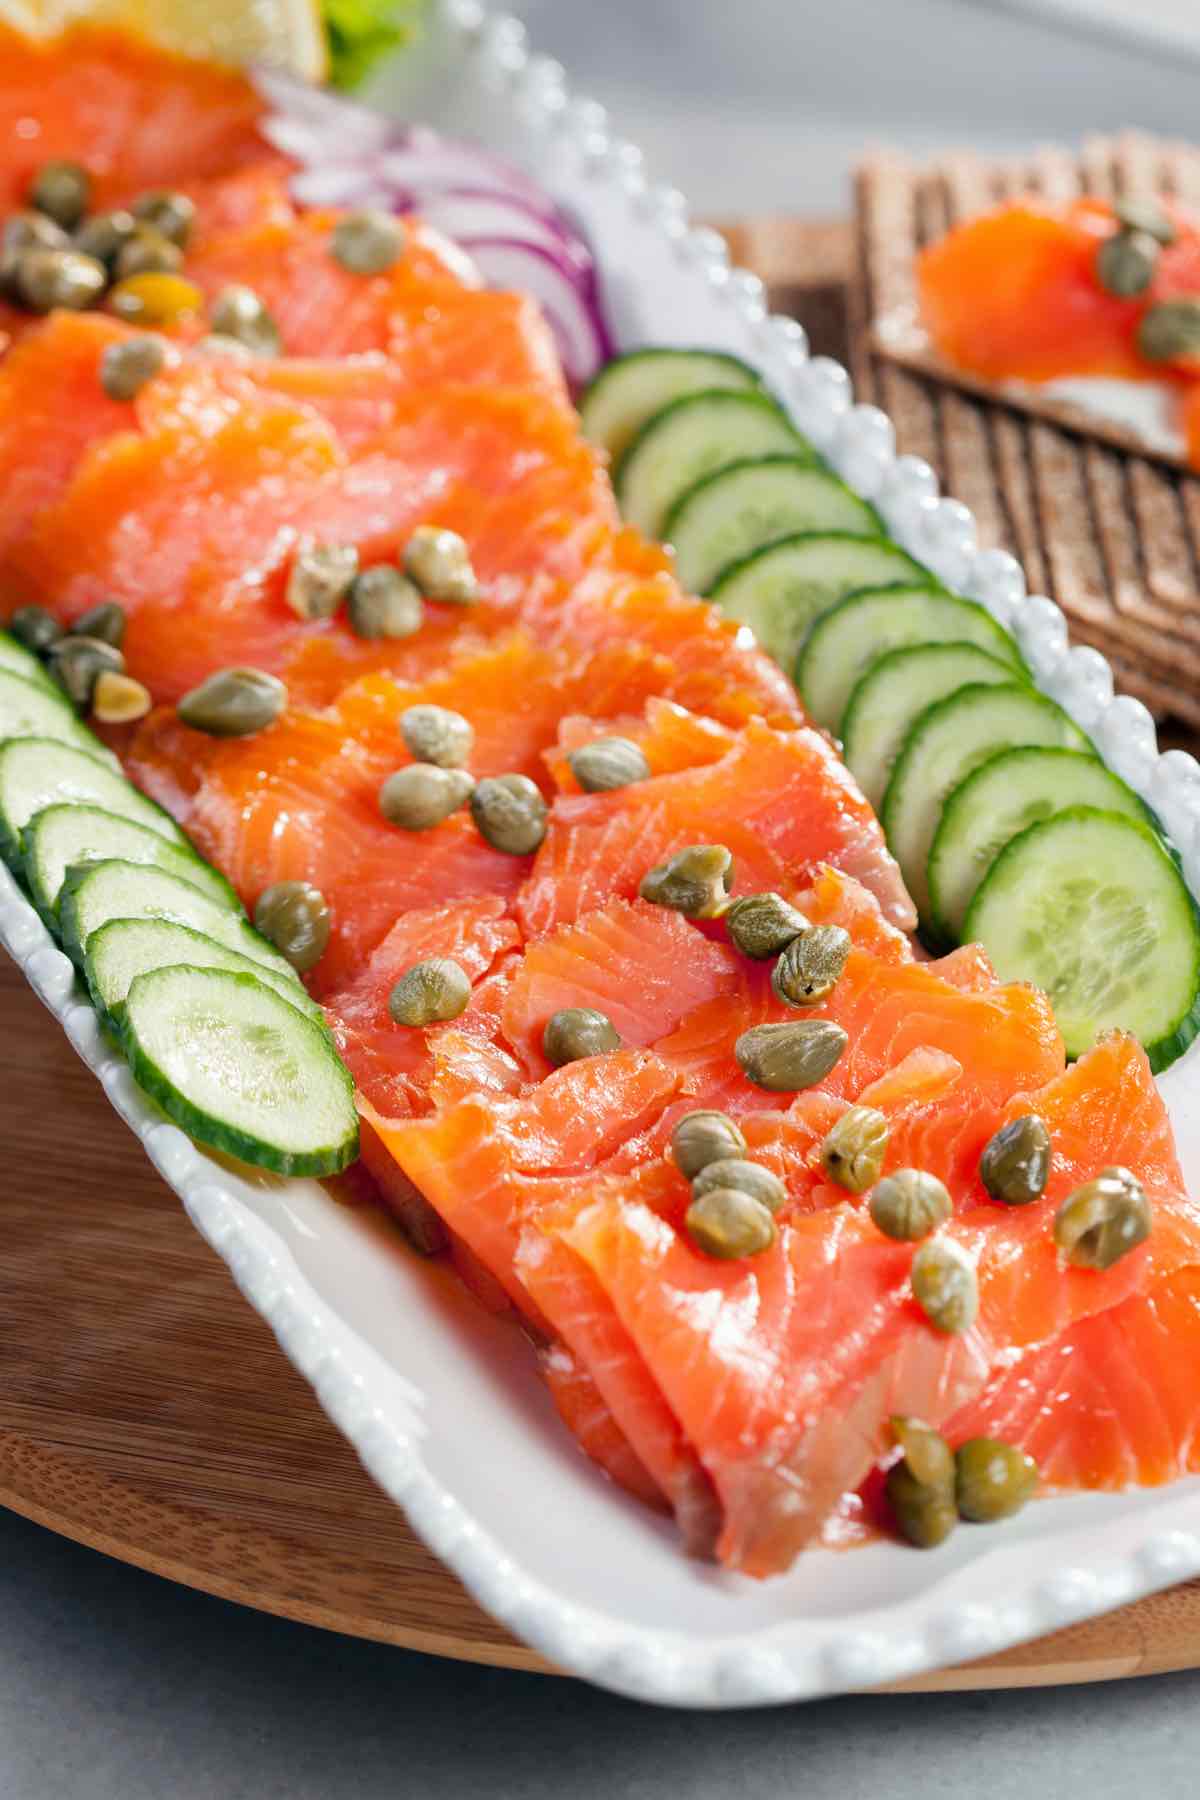 If you have smoked salmon at home, you have so many meal options. It can be easily transformed into delicious Smoked Salmon Recipes that your whole family will love. Cold, hot, breakfast and appetizers, read away and then eat away!